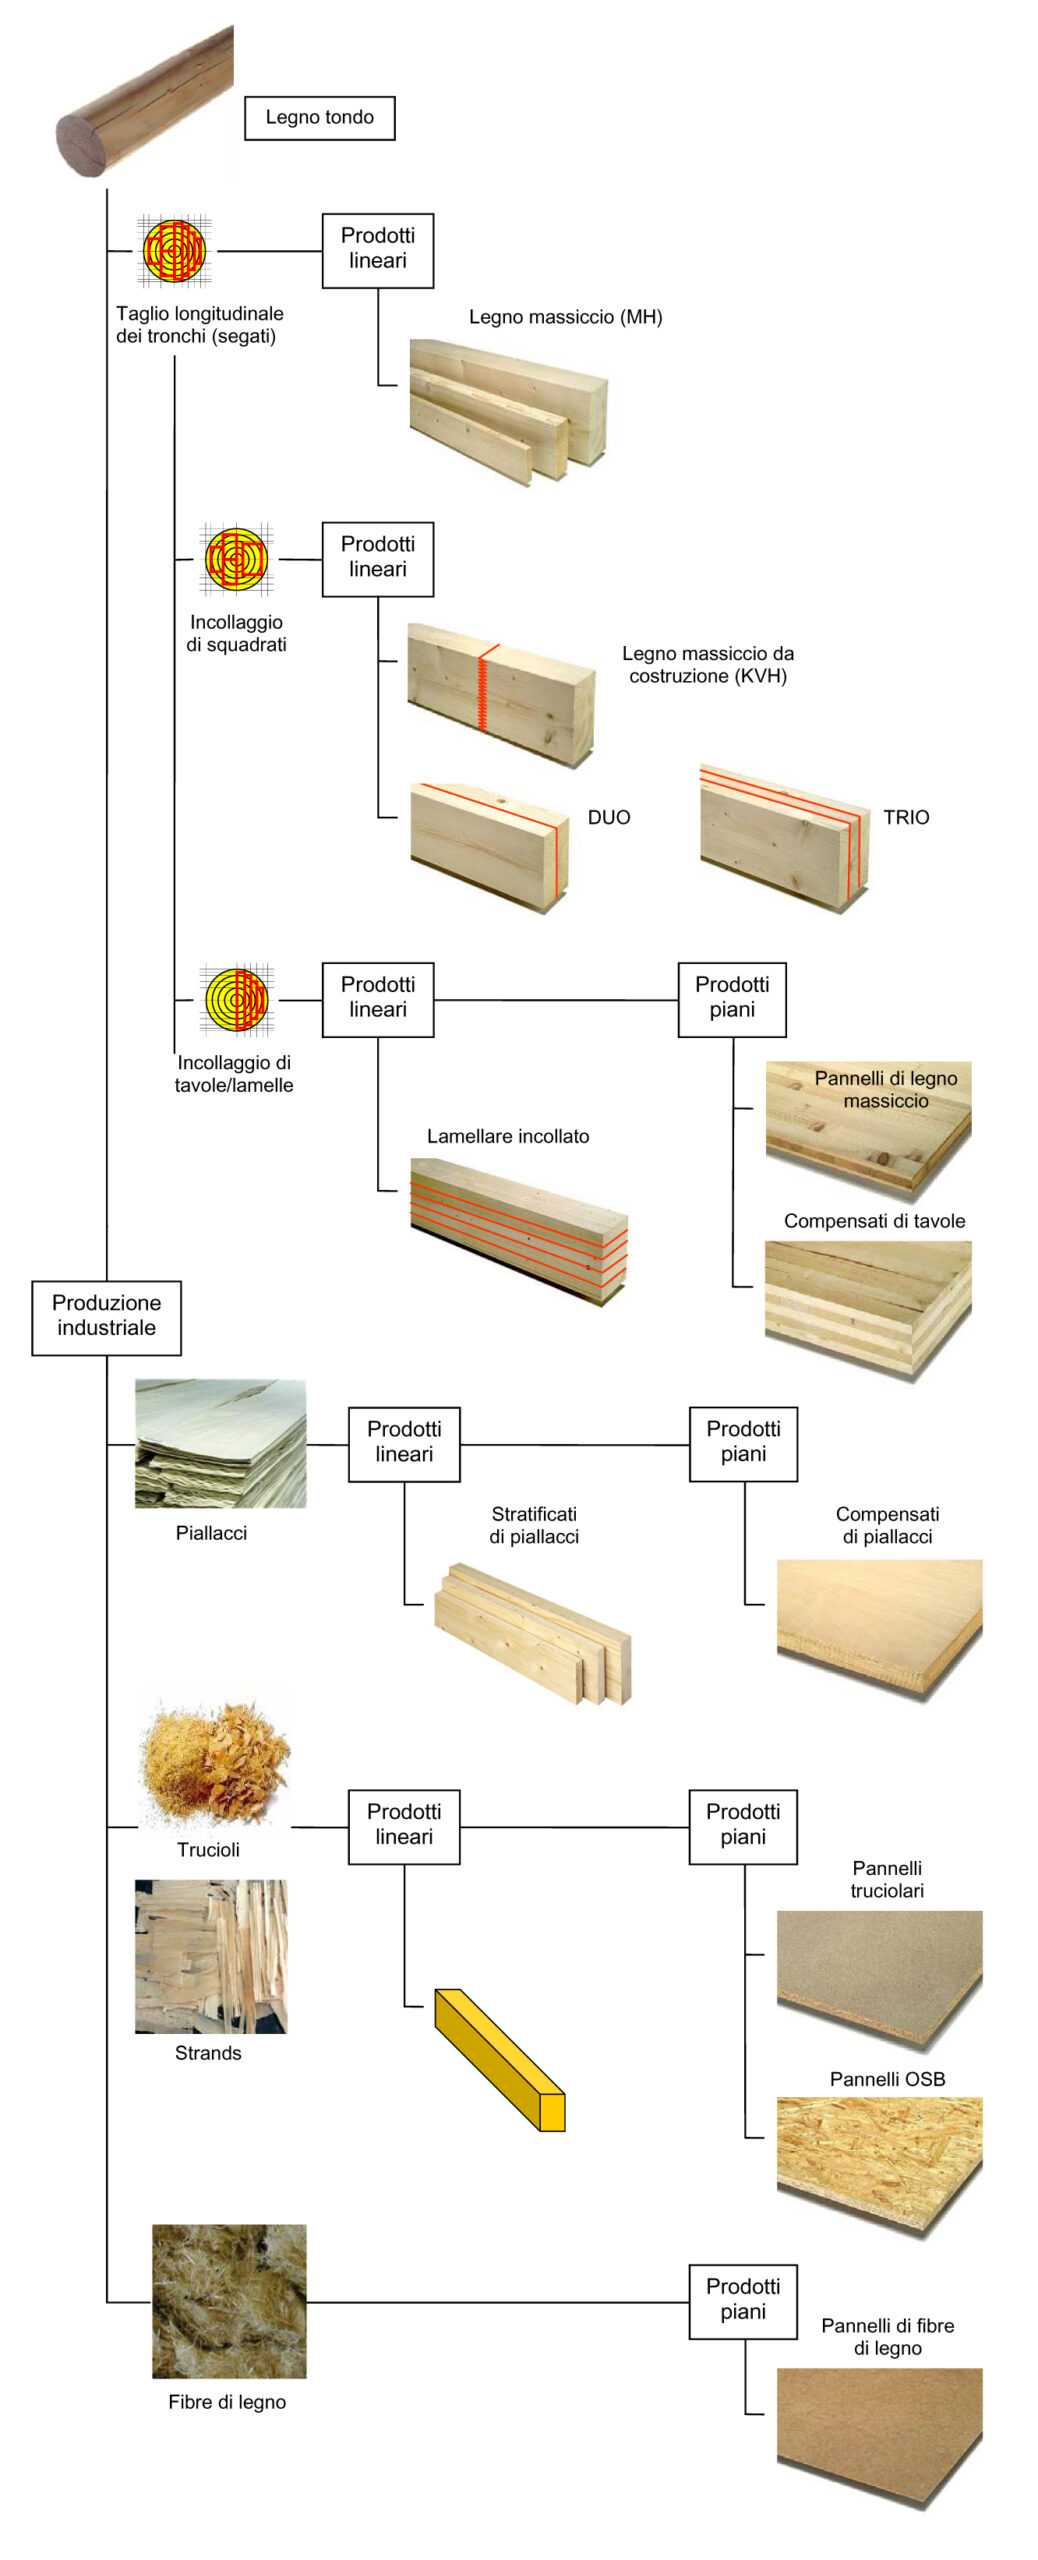 Wood for construction: overview of wood products for construction